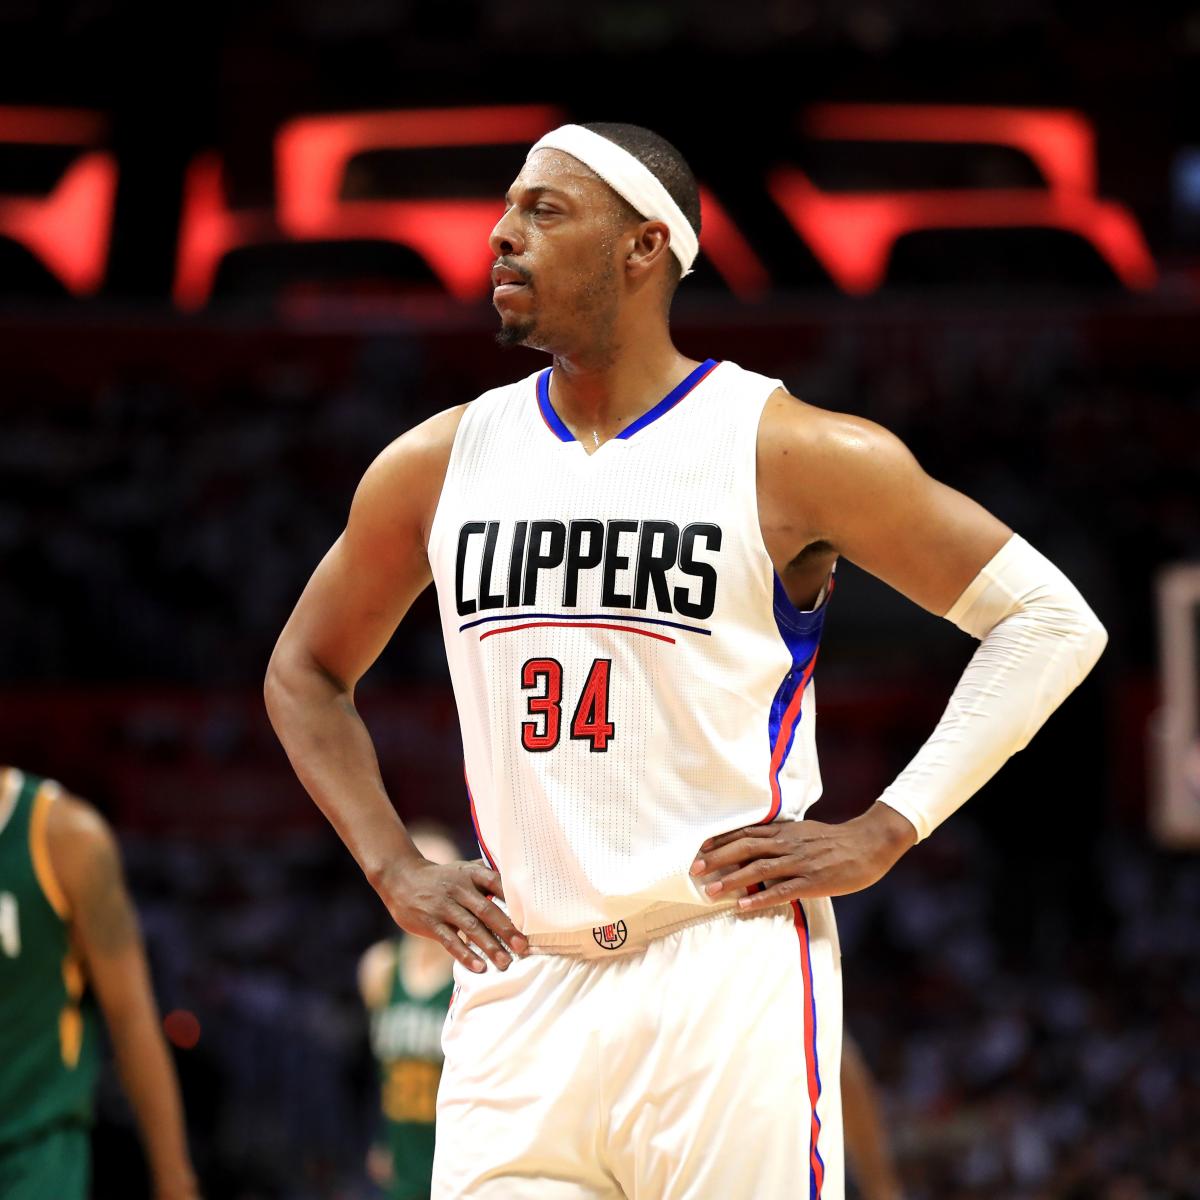 Paul Pierce listed LeBron James in his all-time Top 5 two years ago